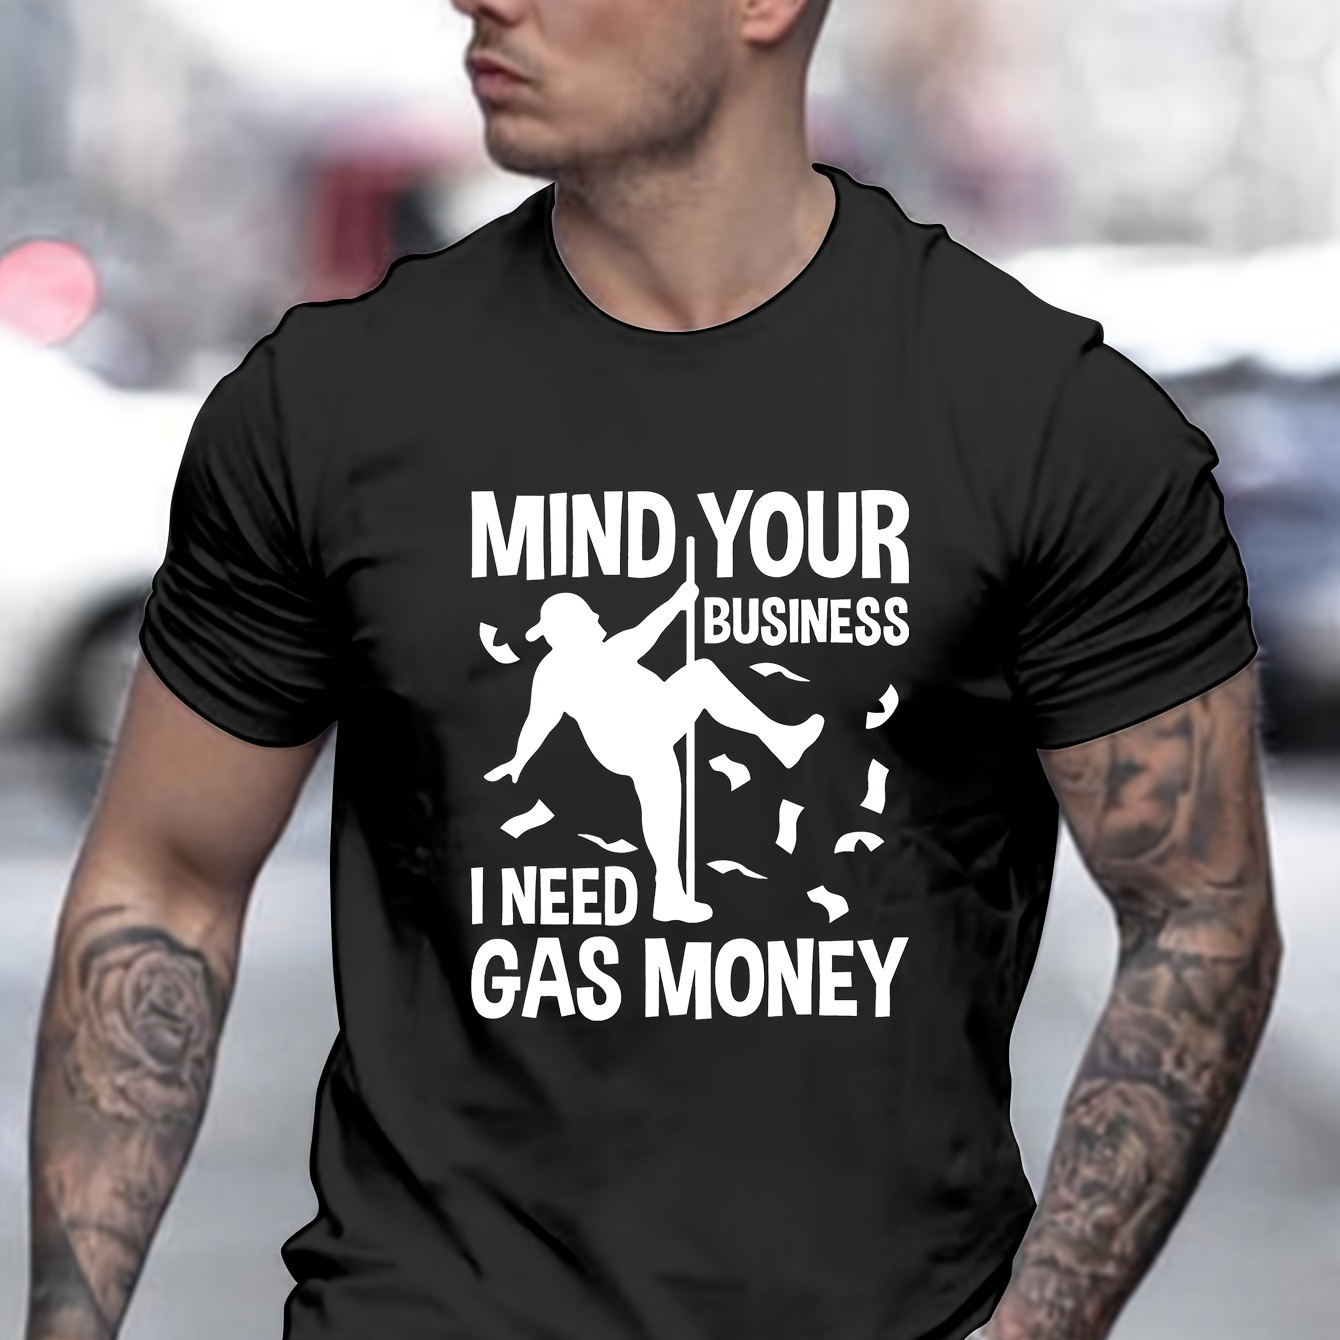 

1 Pc, 100% Cotton T-shirt, 1pc Gas Money Print Mens T-shirt - Stylish Graphic, Breathable Crew Neck, Short Sleeve, Ultra-comfortable Fit - Perfect For Summer & Spring, Athletic Style, Ideal Gift